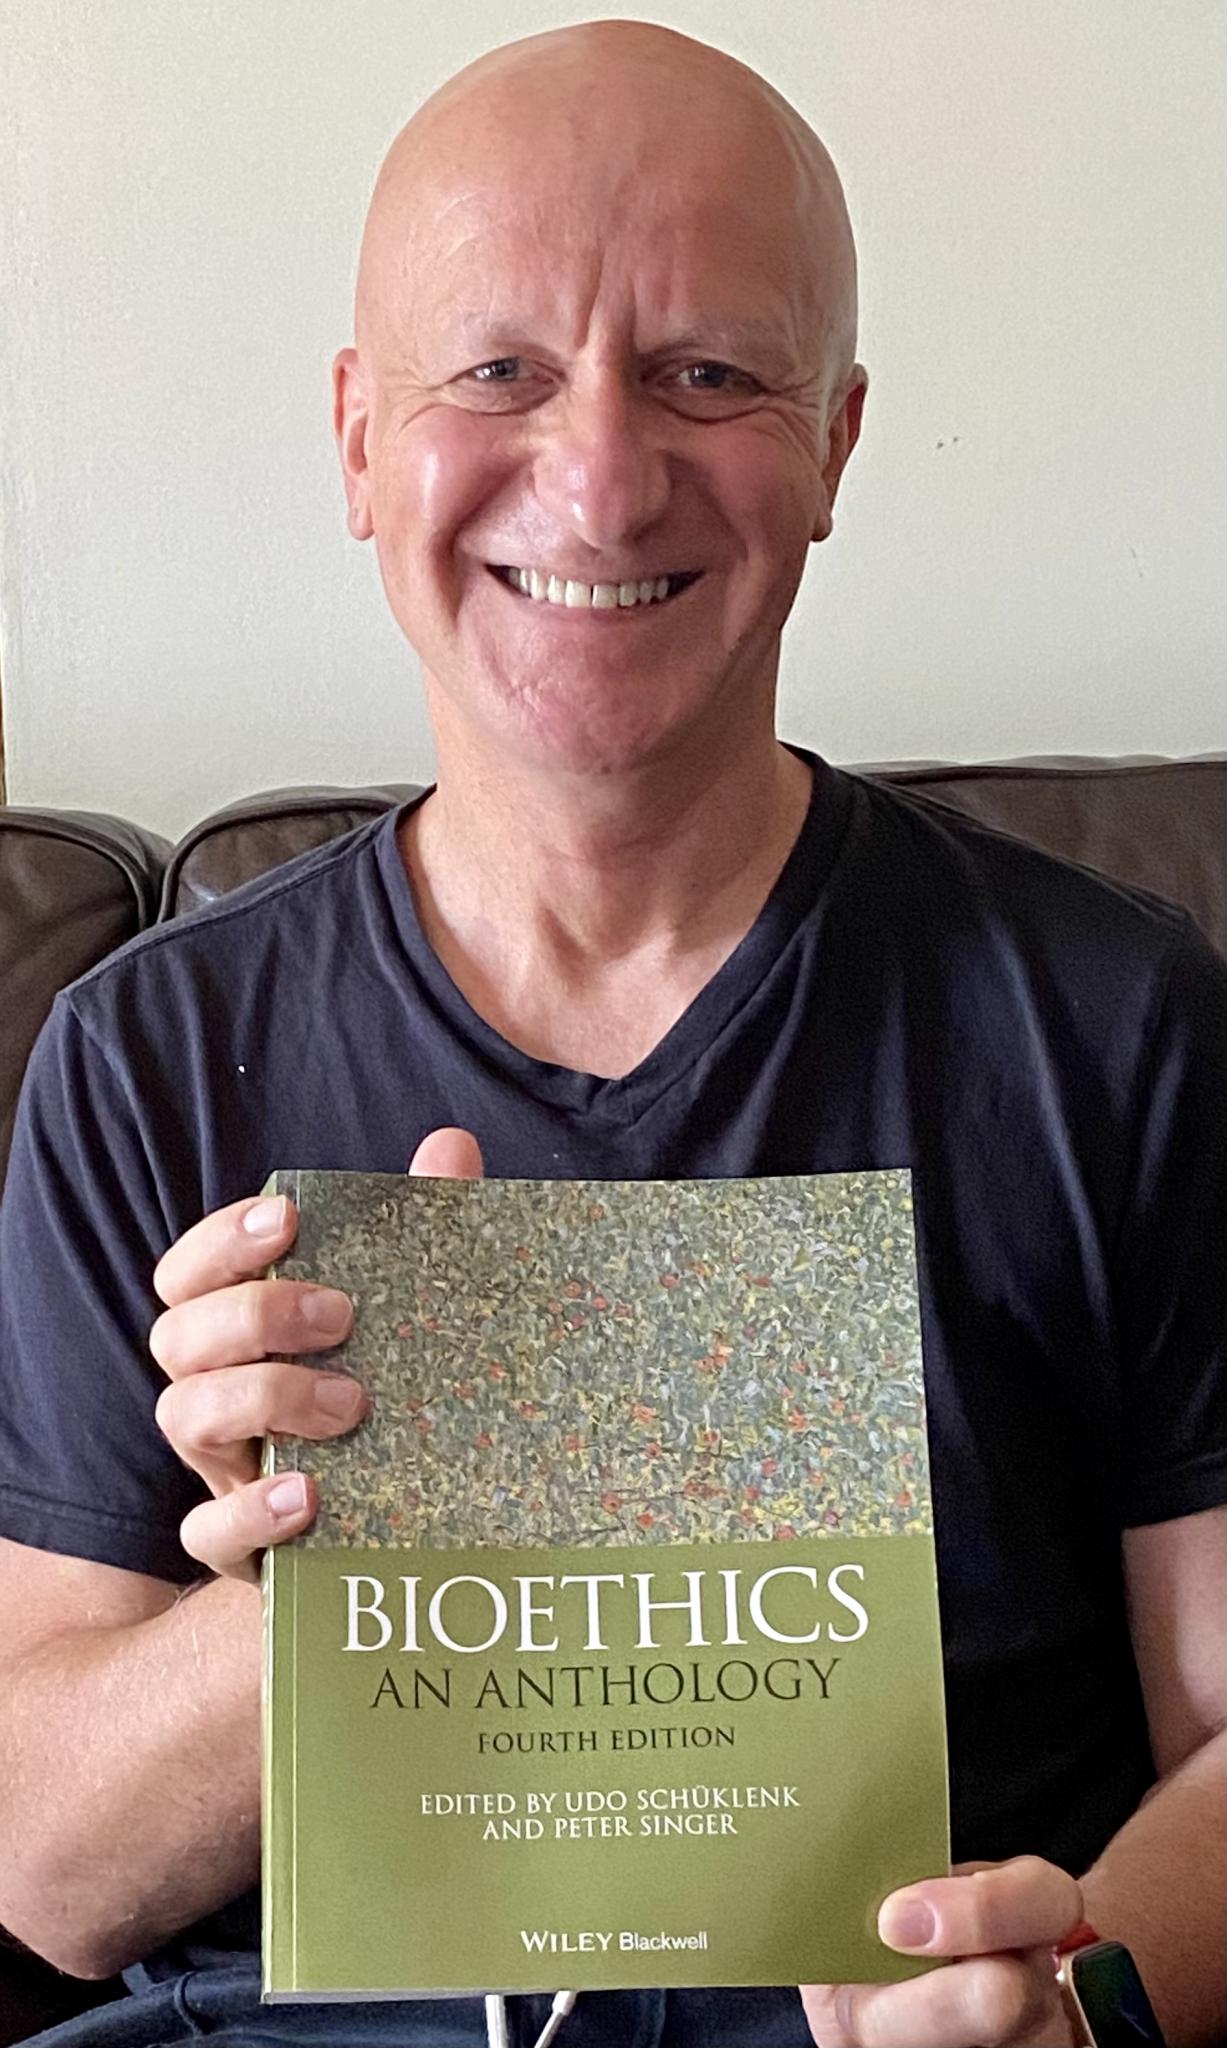 Udo Schüklenk with the Fourth Edition of Bioethics: An Anthology.